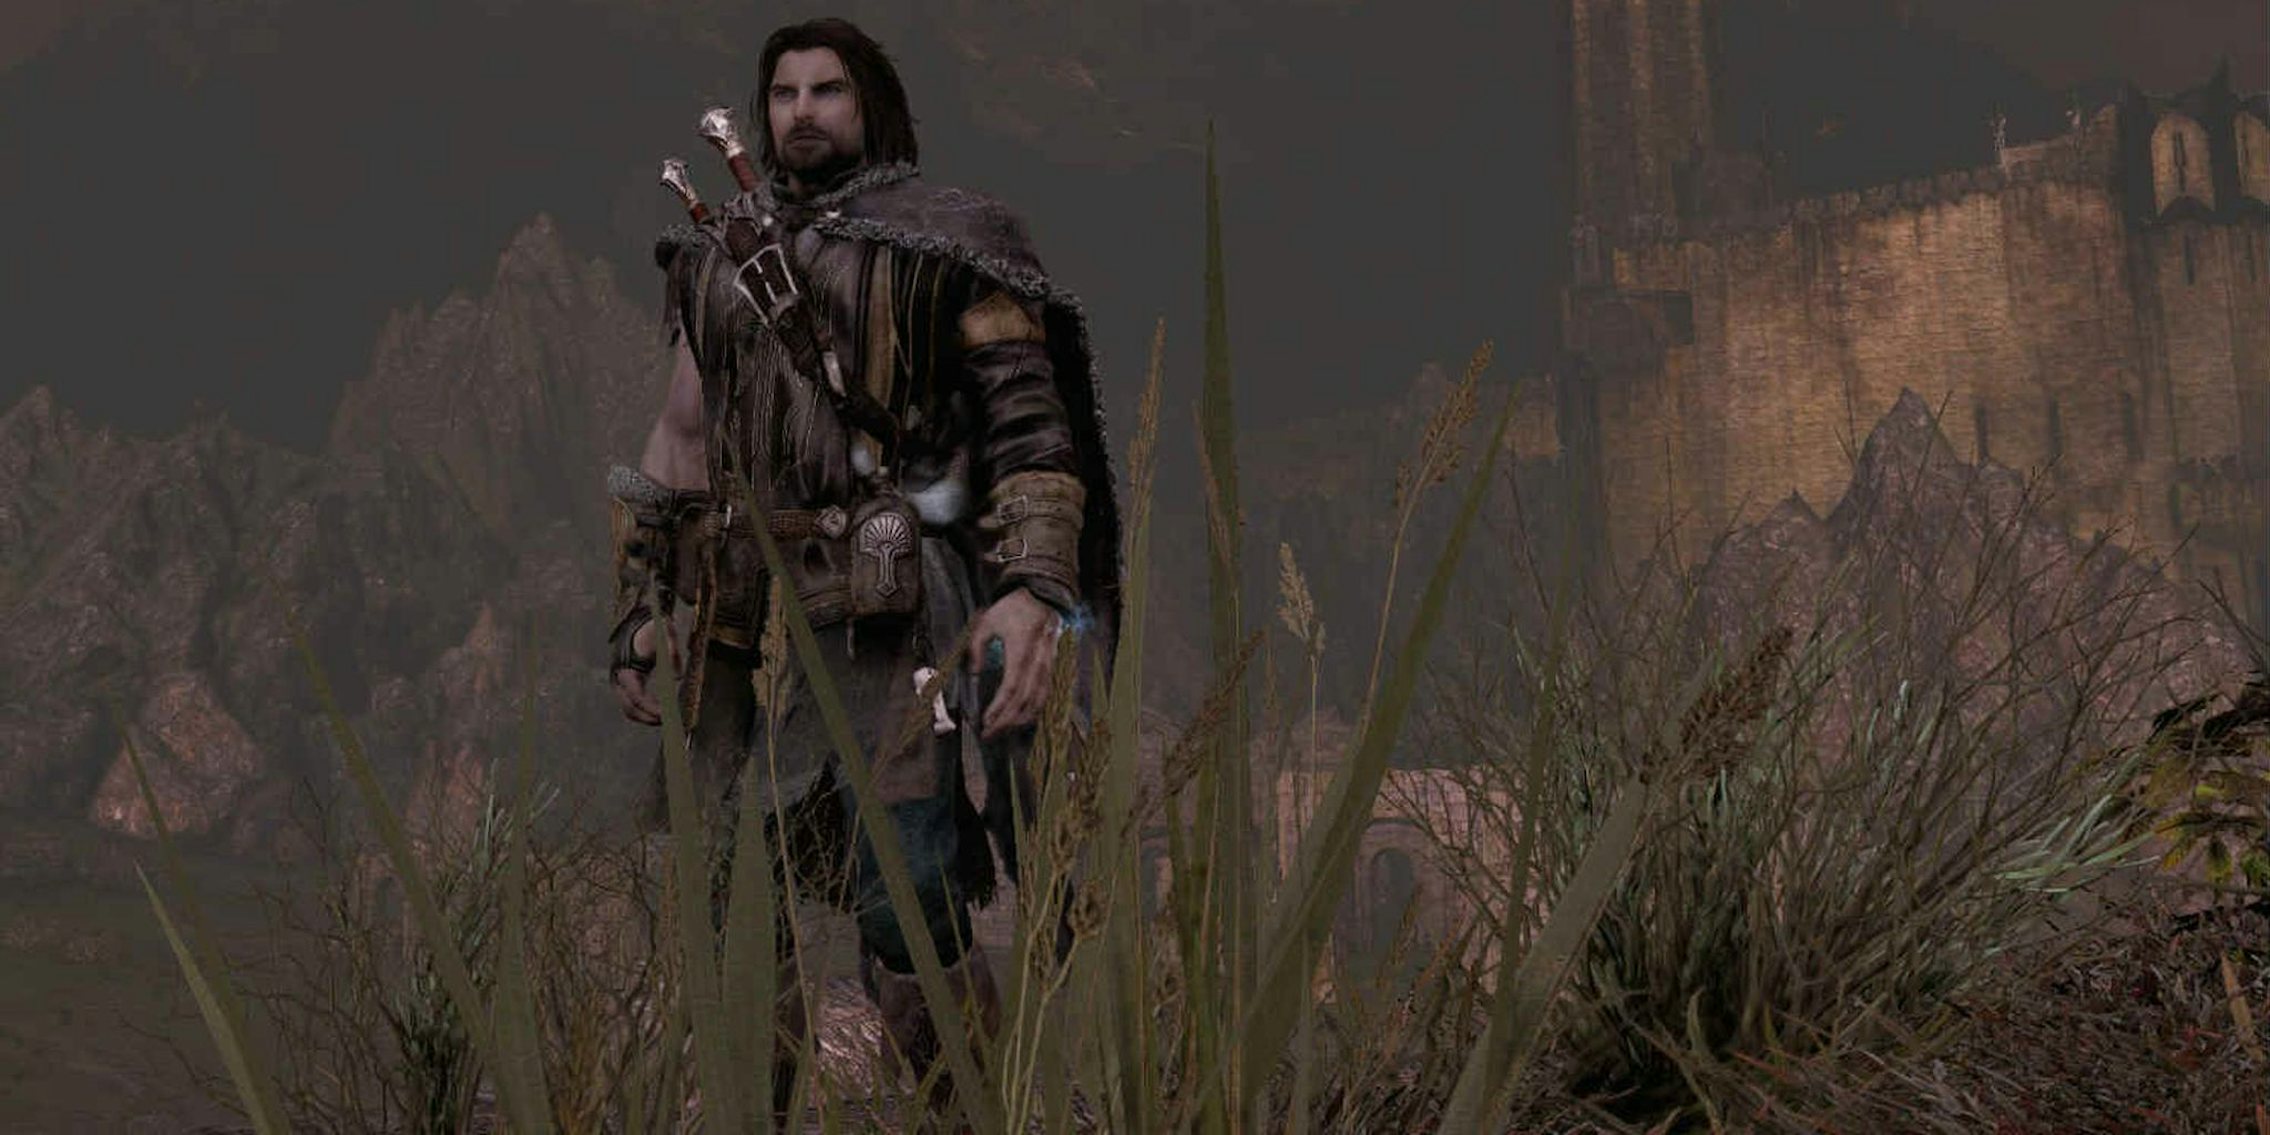 Middle Earth: Shadow of Mordor - A Challenging Journey